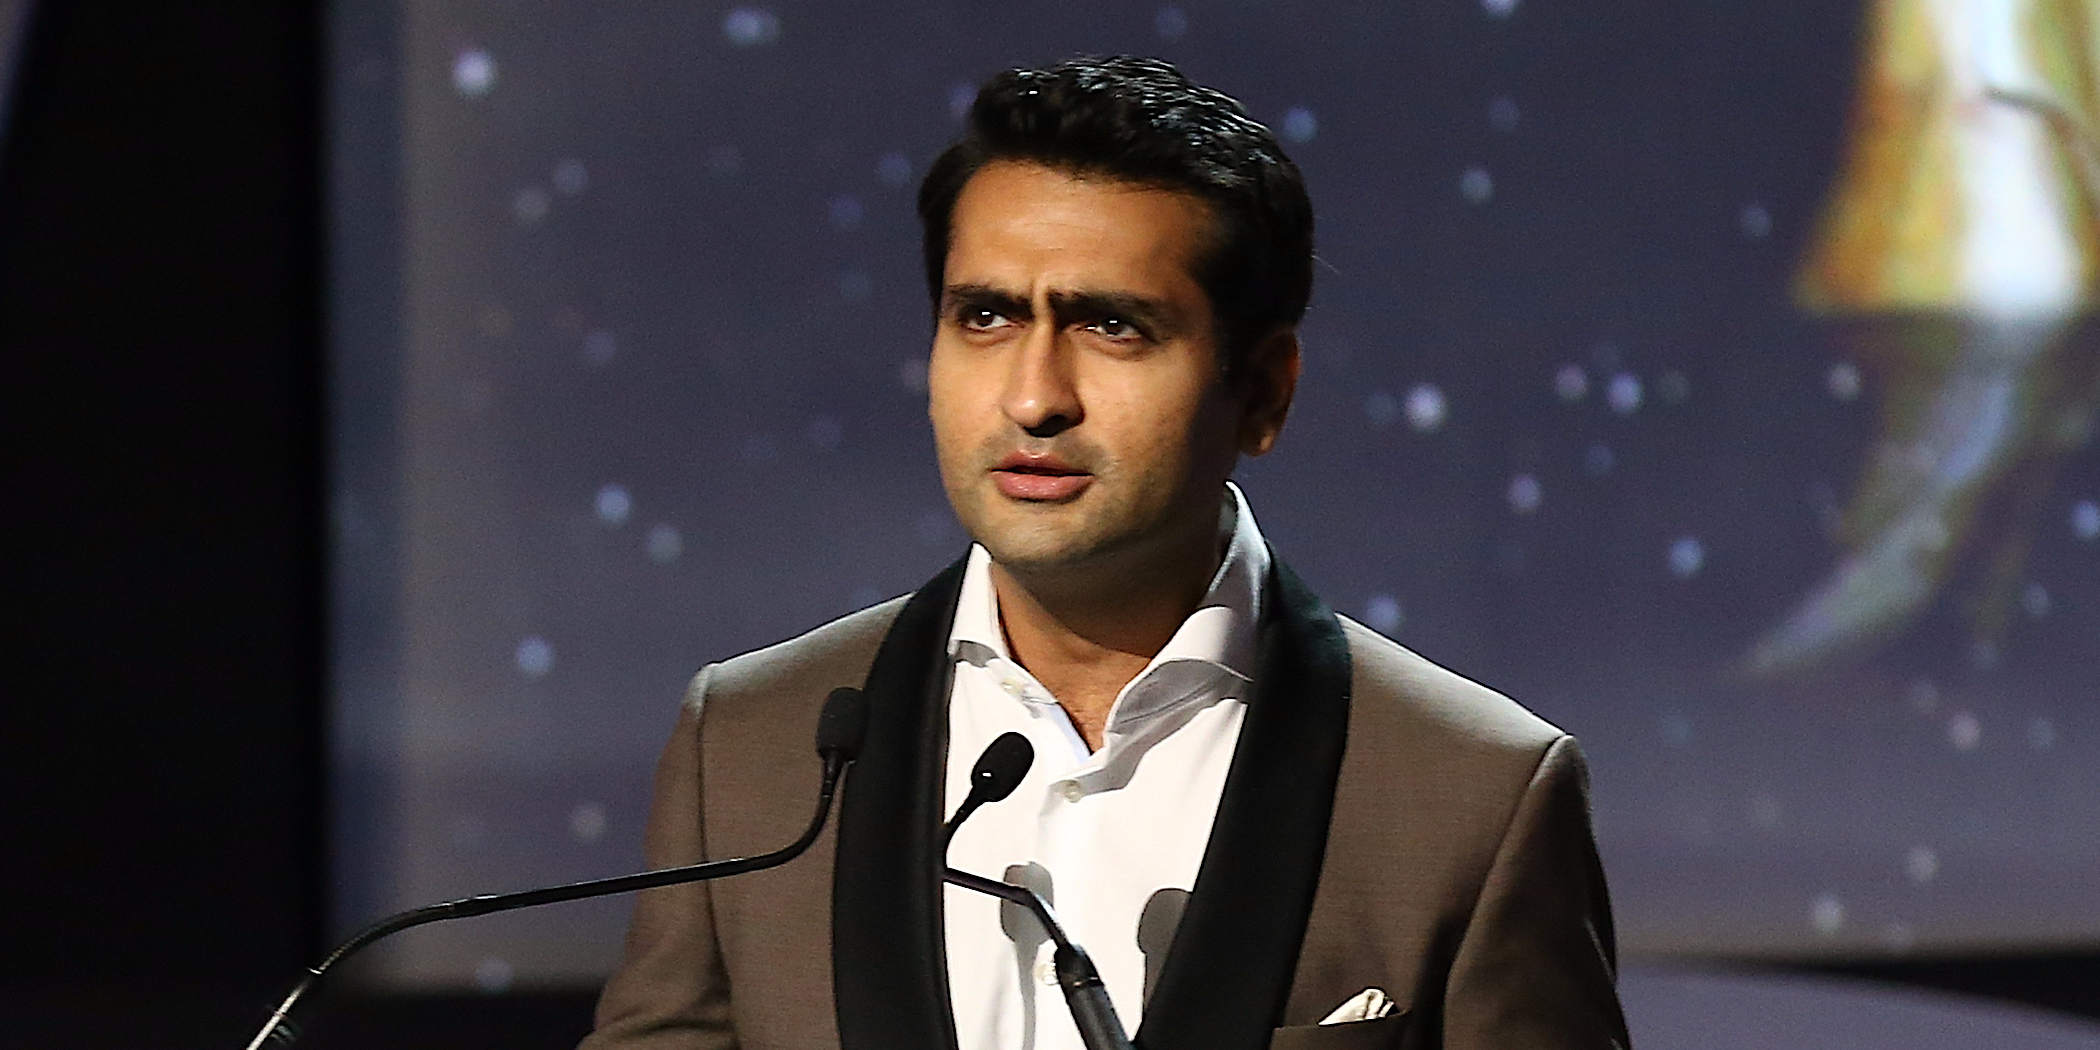 Kumail Nanjiani actor comedian silicon valley